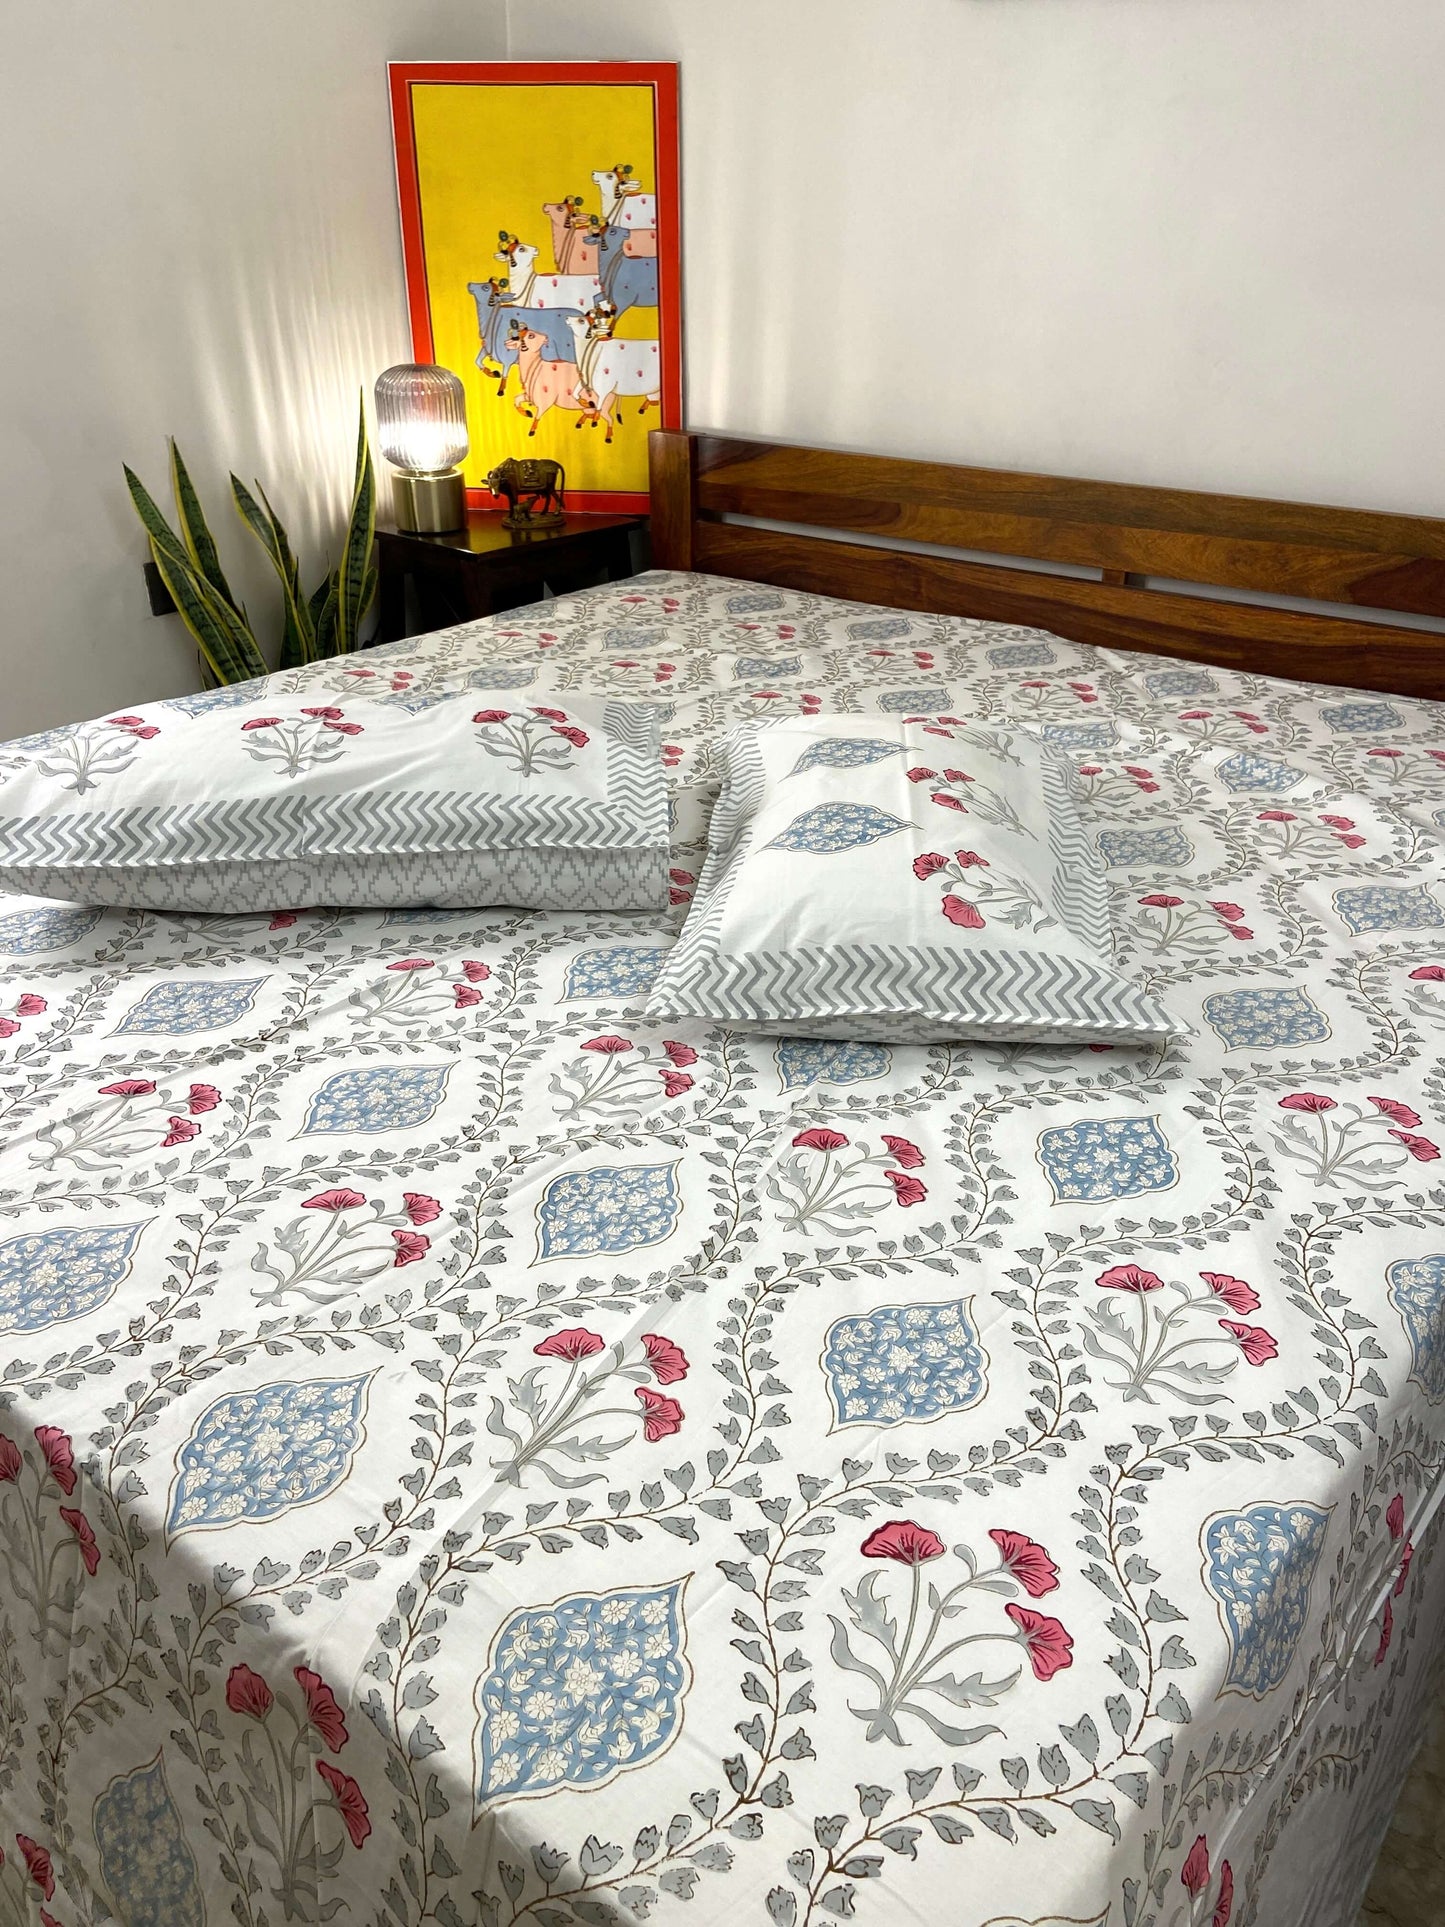 Floral Jaal Percale Hand Block Cotton King Bedsheet